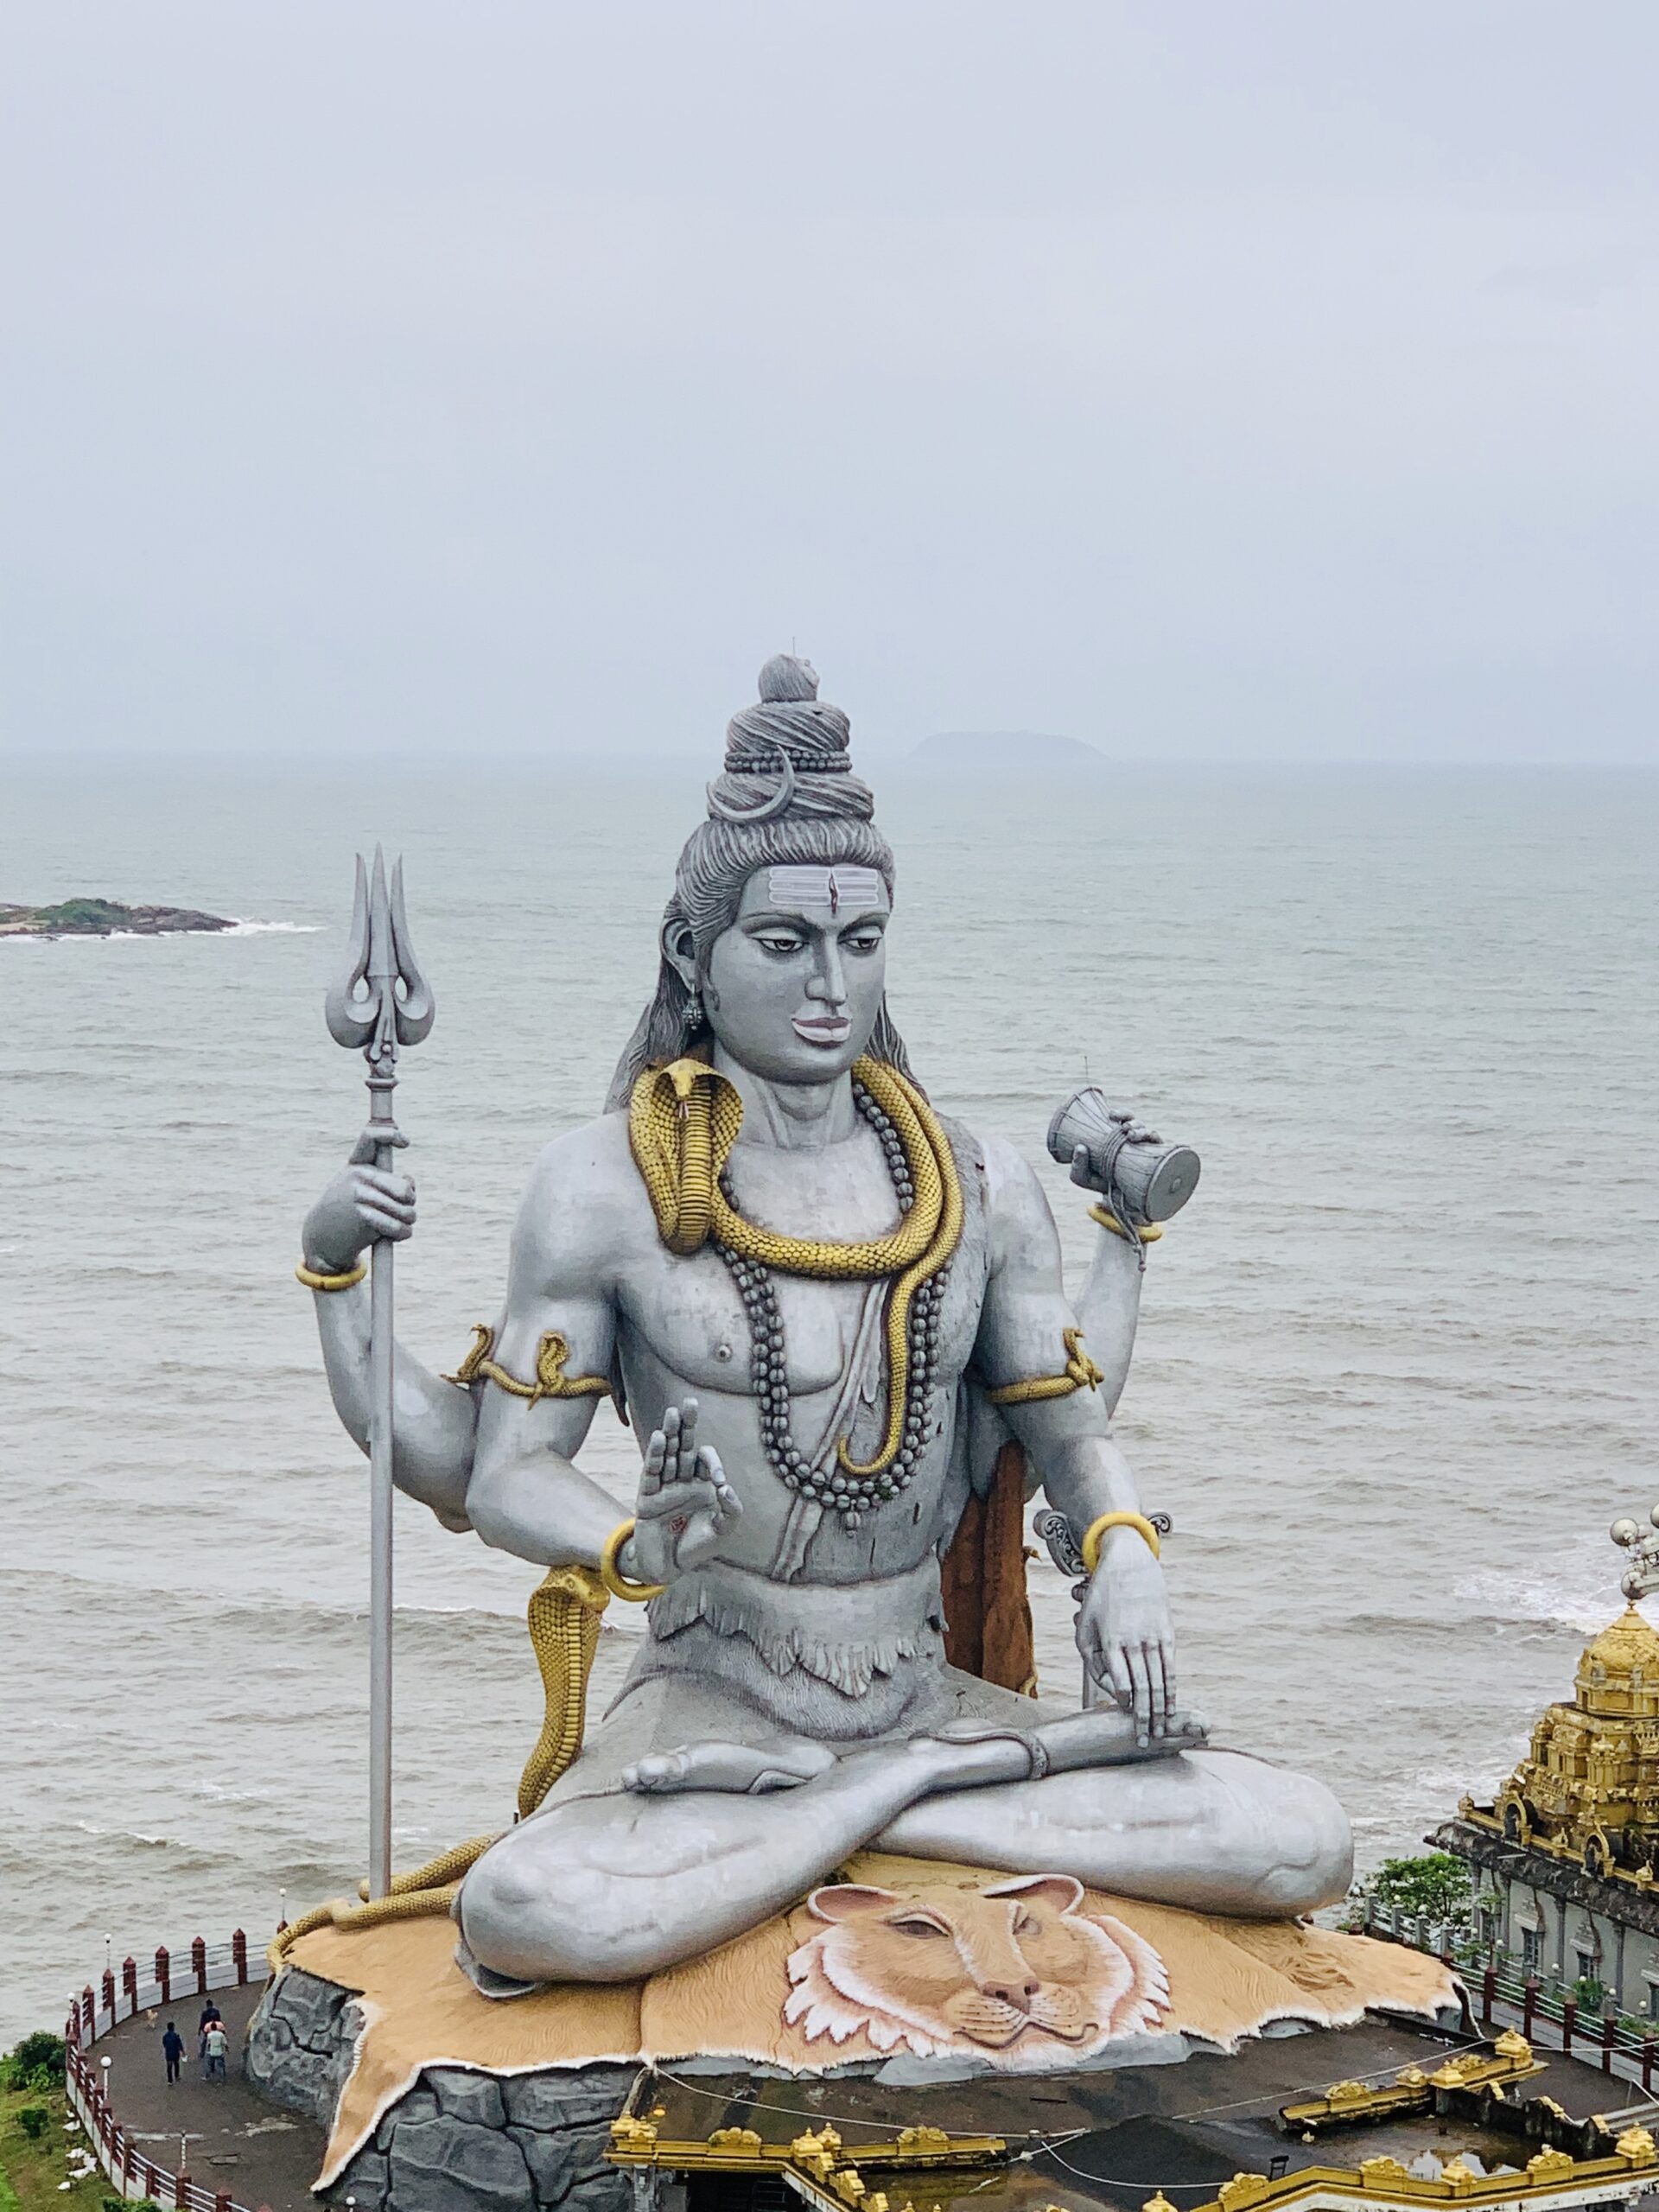 Lord Shiva Spiritual: How to please Lord Shiva quickly?